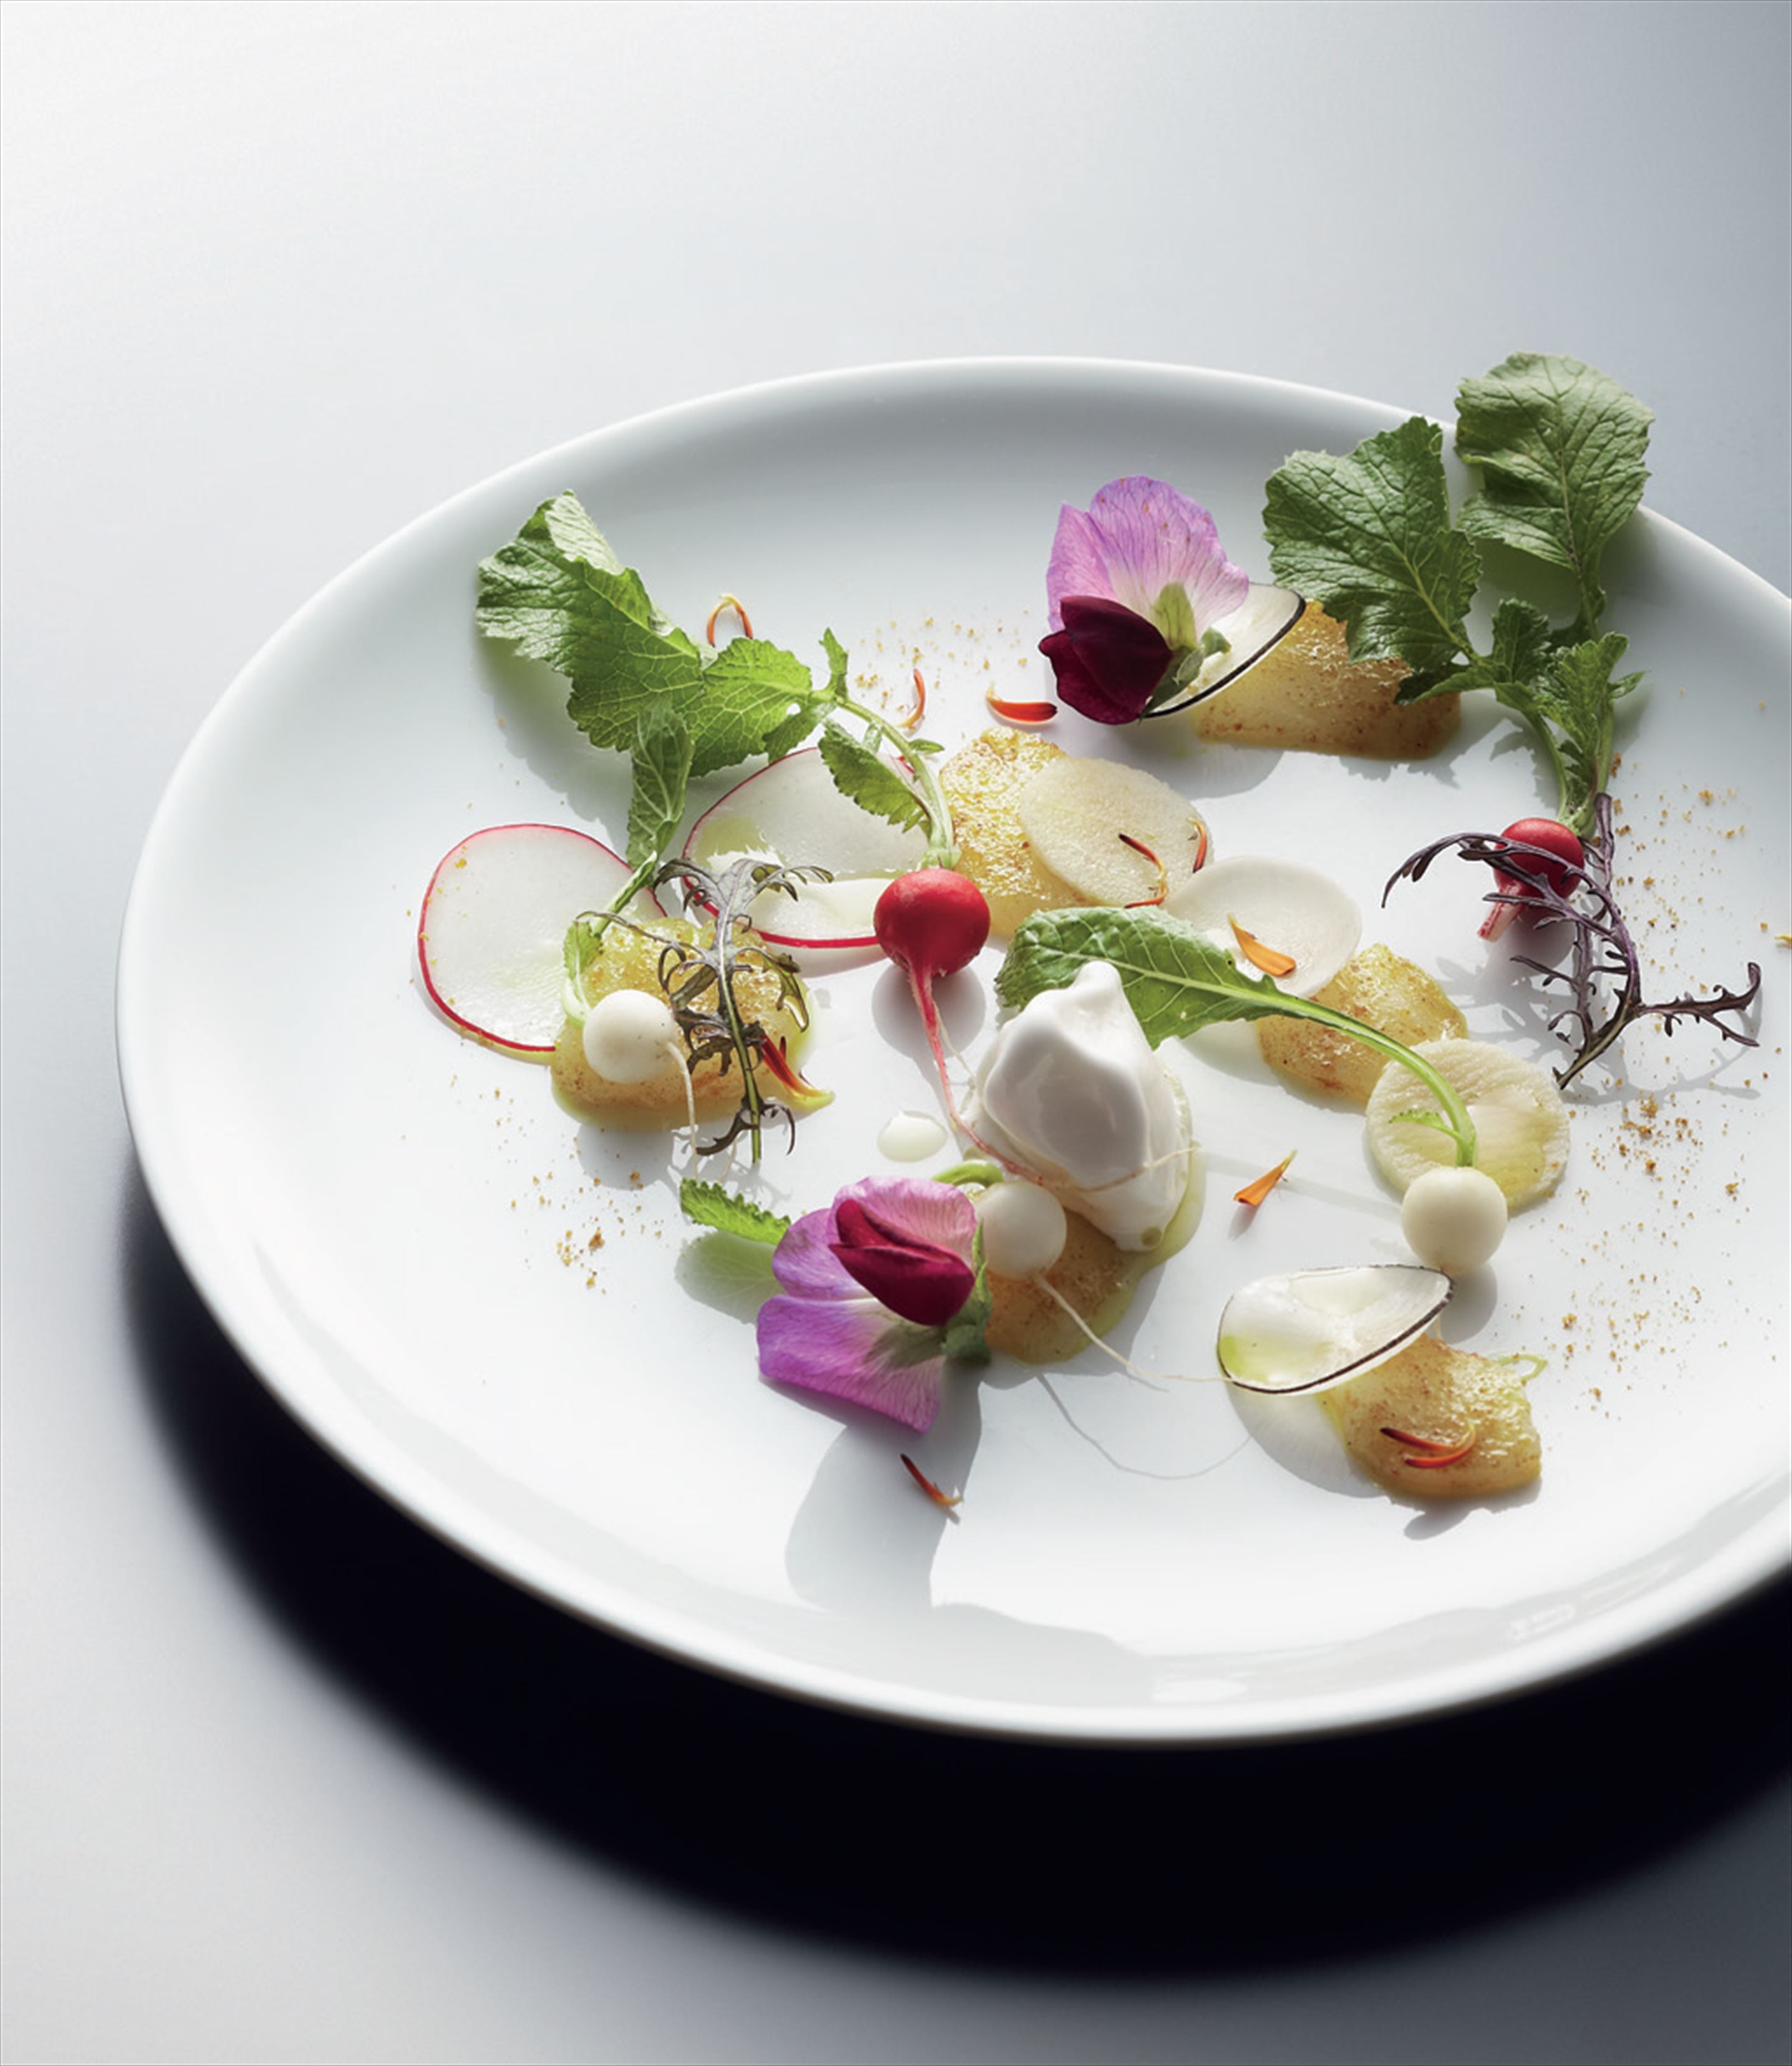 Spring bay scallops with vadouvan, radish, turnip and apple